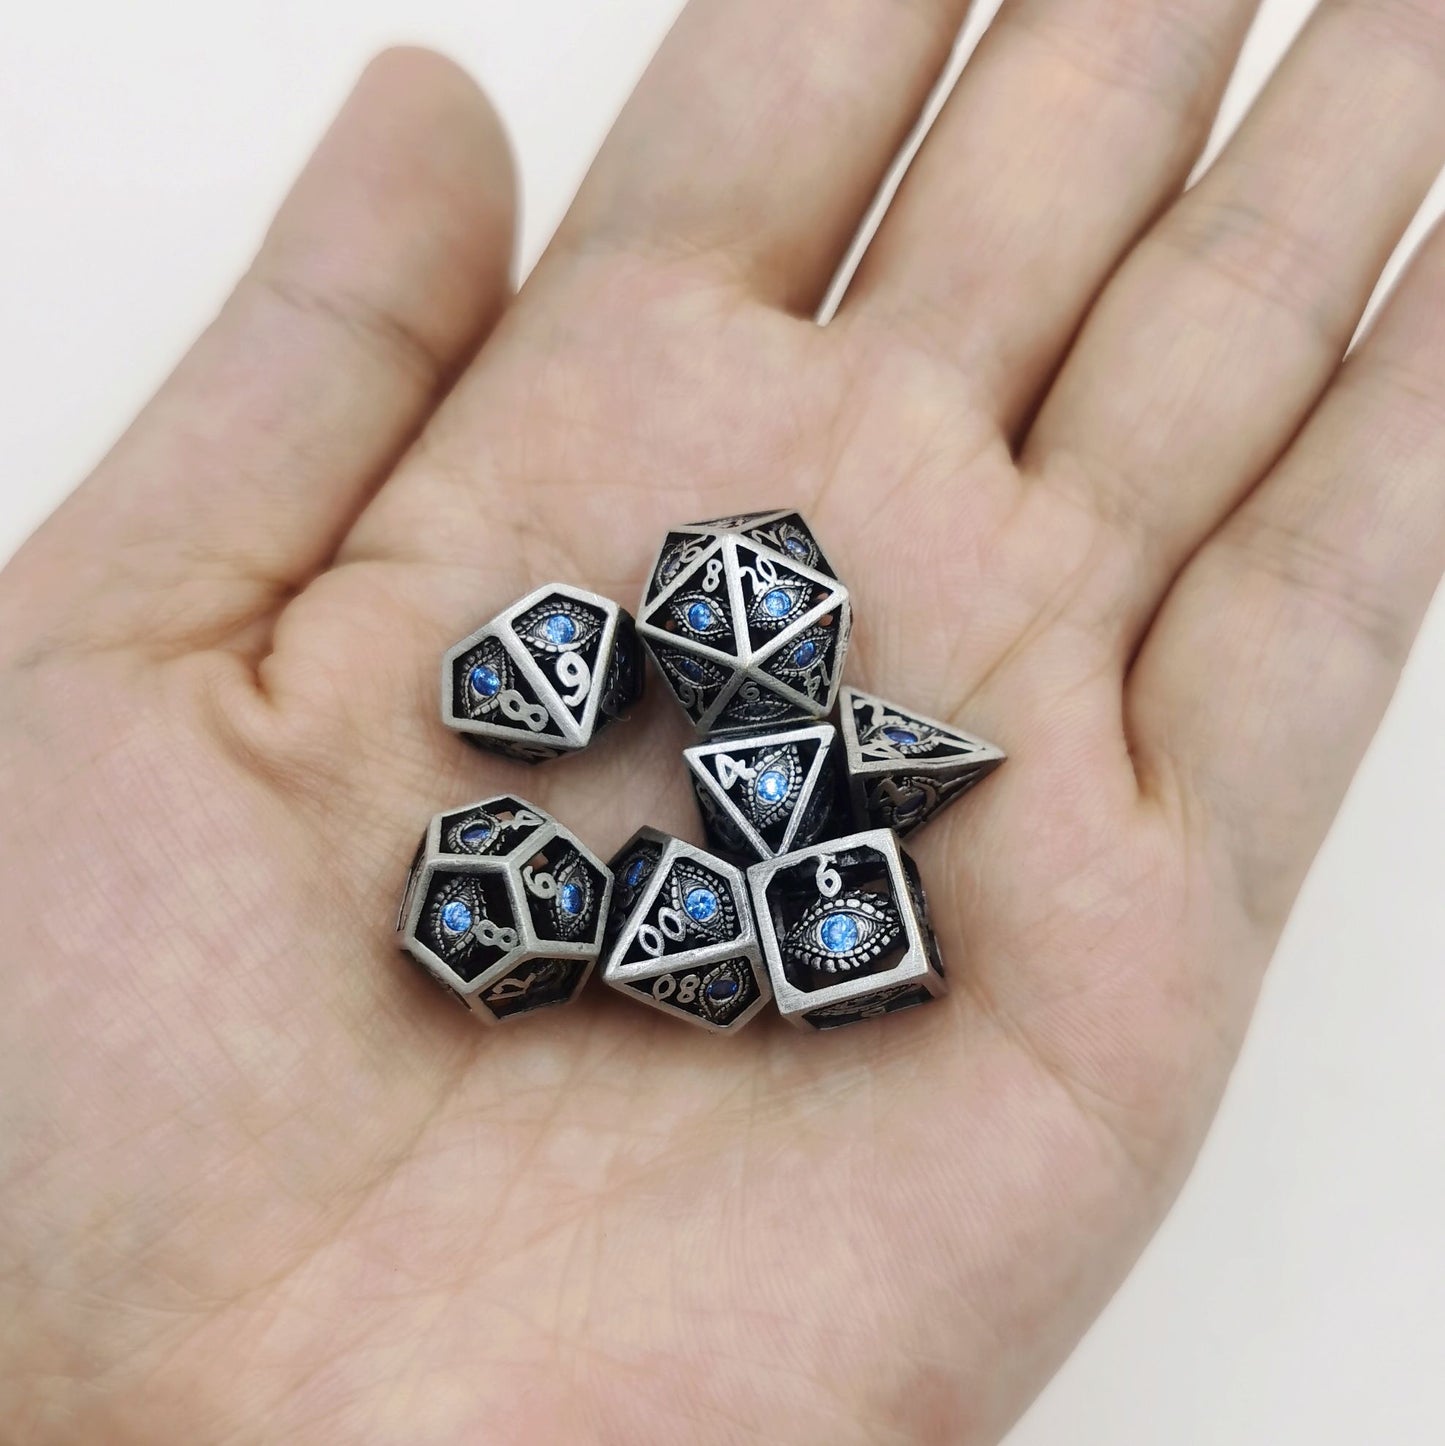 Hollow 10mm mini Dragon's Eye dice set-Ancient Silver with Blue Gems